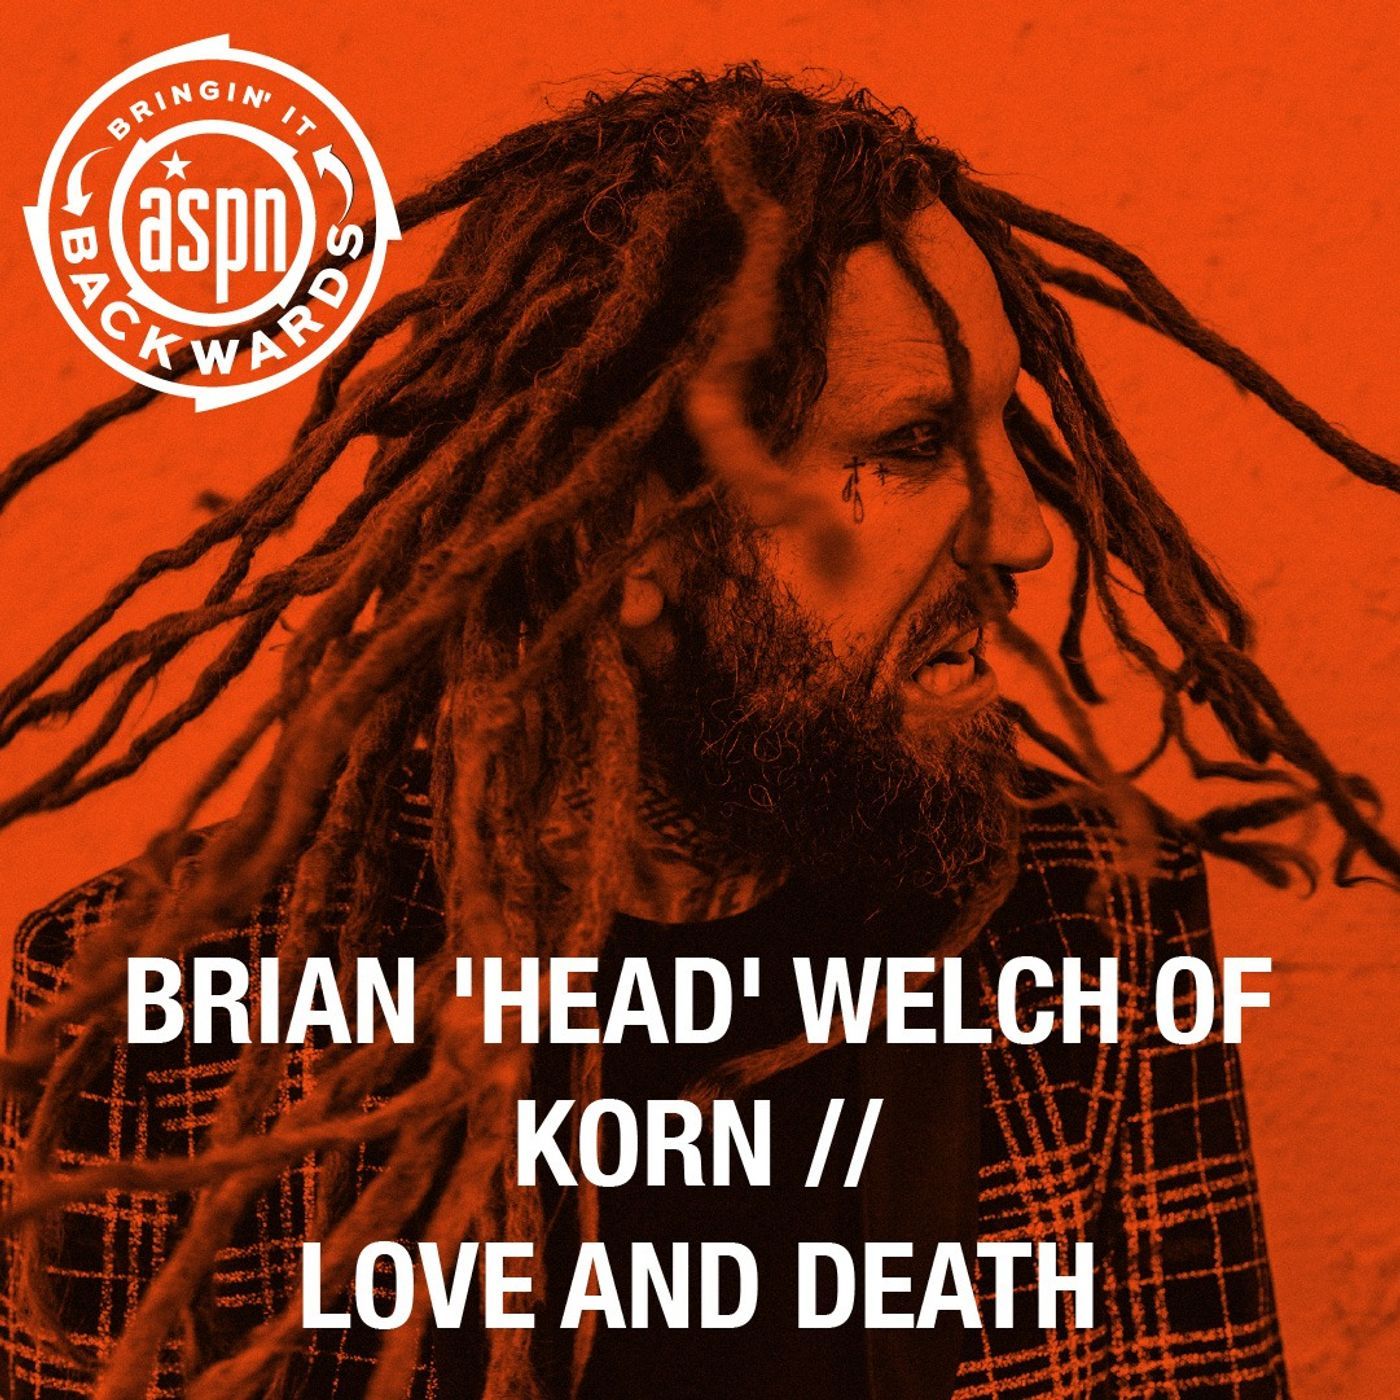 Interview with Brian 'Head' Welch of Love and Death and Korn